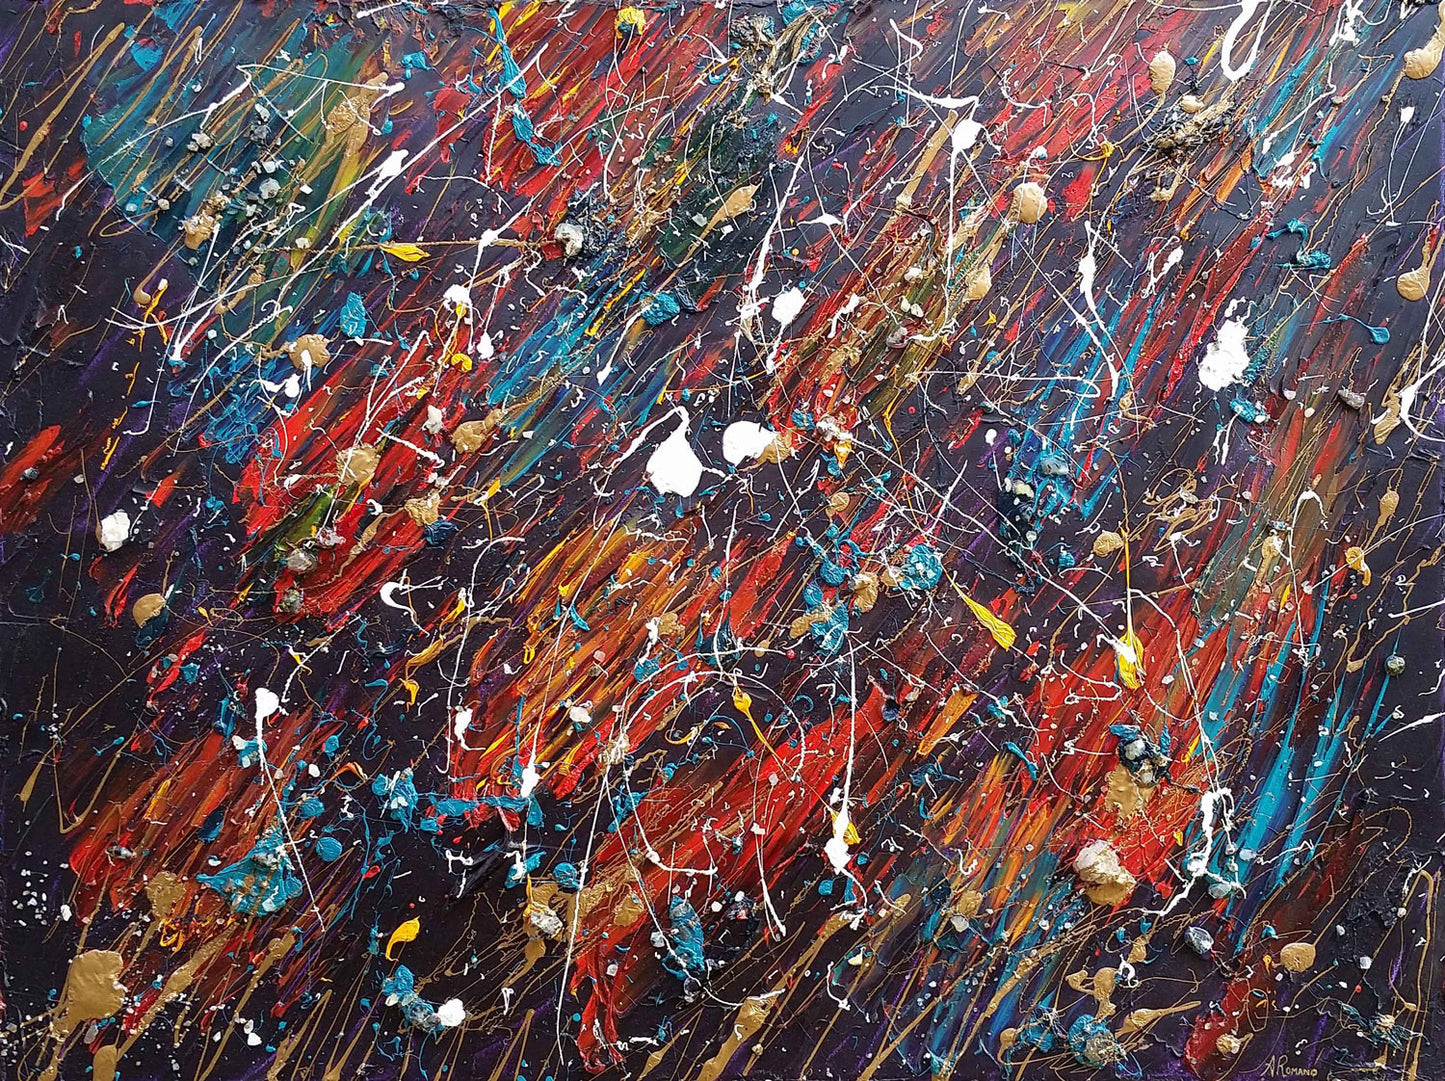 Galaxy Oil on Canvas Ink Rocks Abstract Expressionism Art Modern Contemporary Painting Texture Impasto Outer Space Meteorites Cosmic Colourful